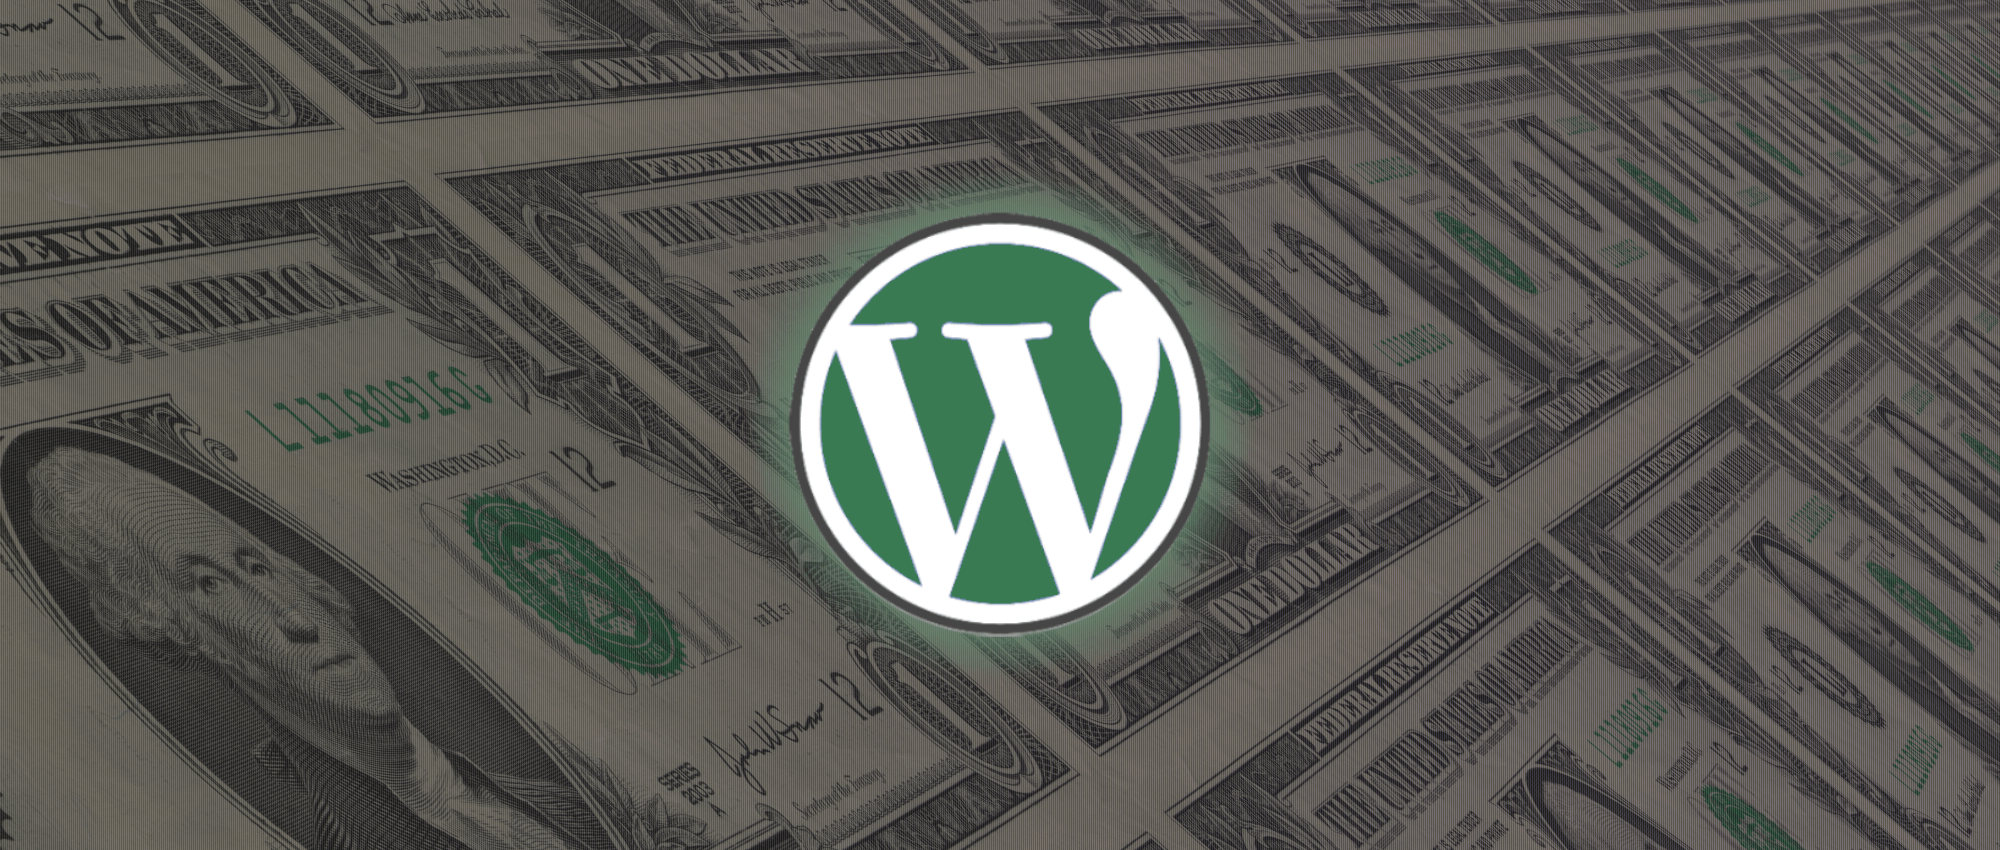 wordpress can give you money